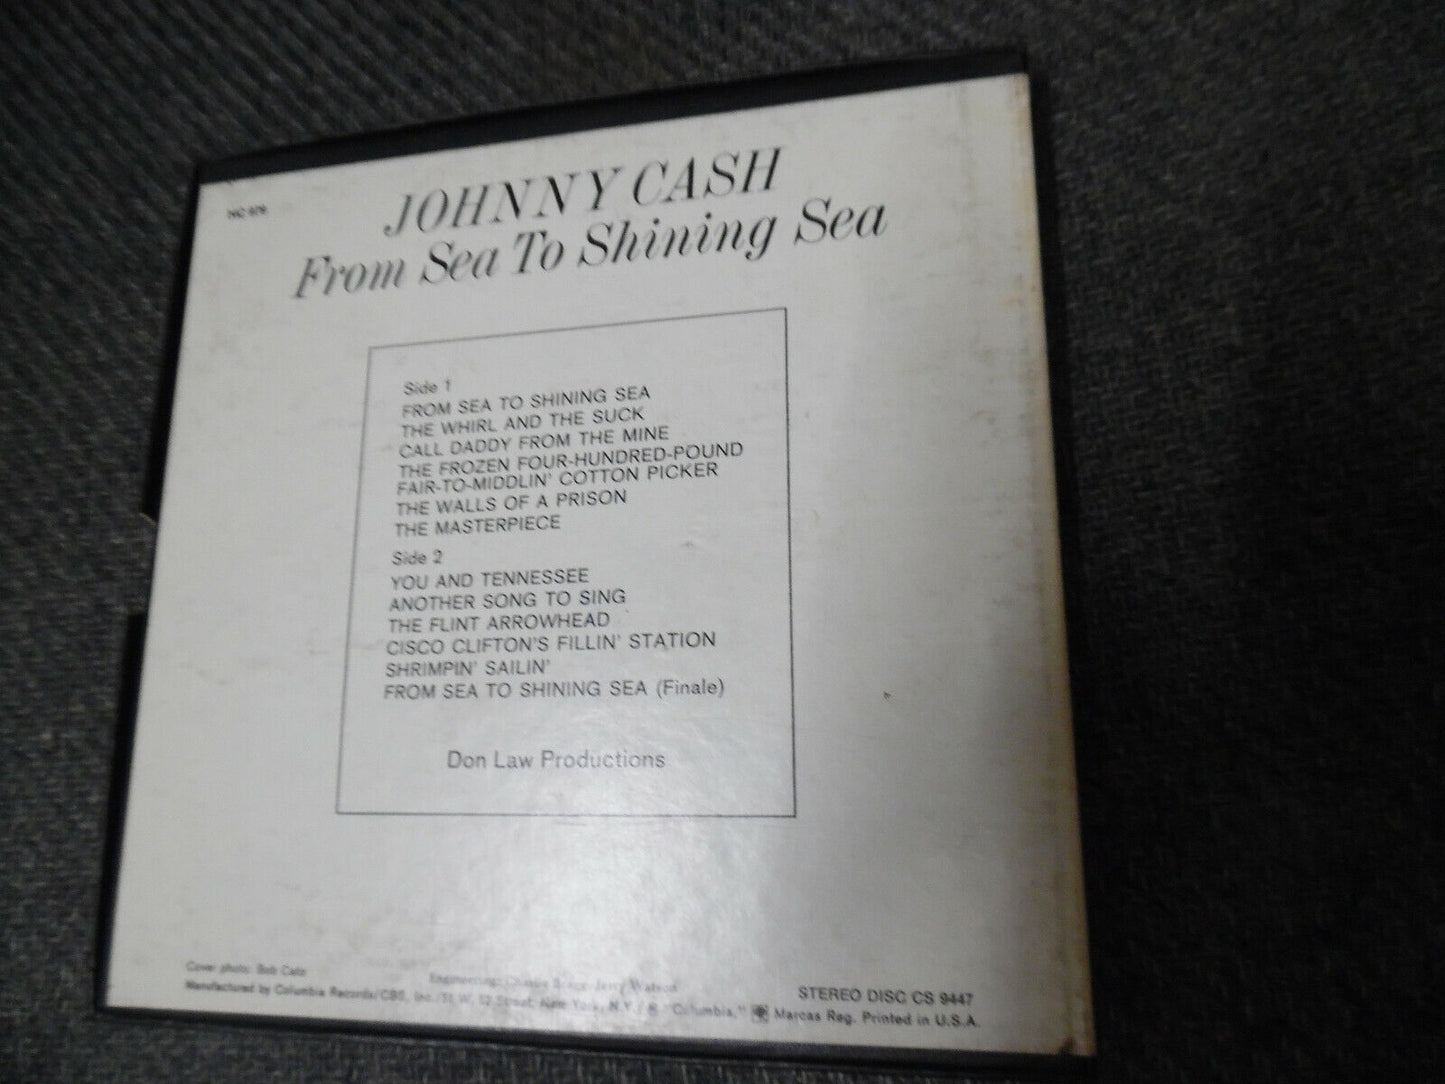 Johnny Cash From Sea To Shining Sea Columbia 4 Track 3 3/4 IPS Reel to Reel tape